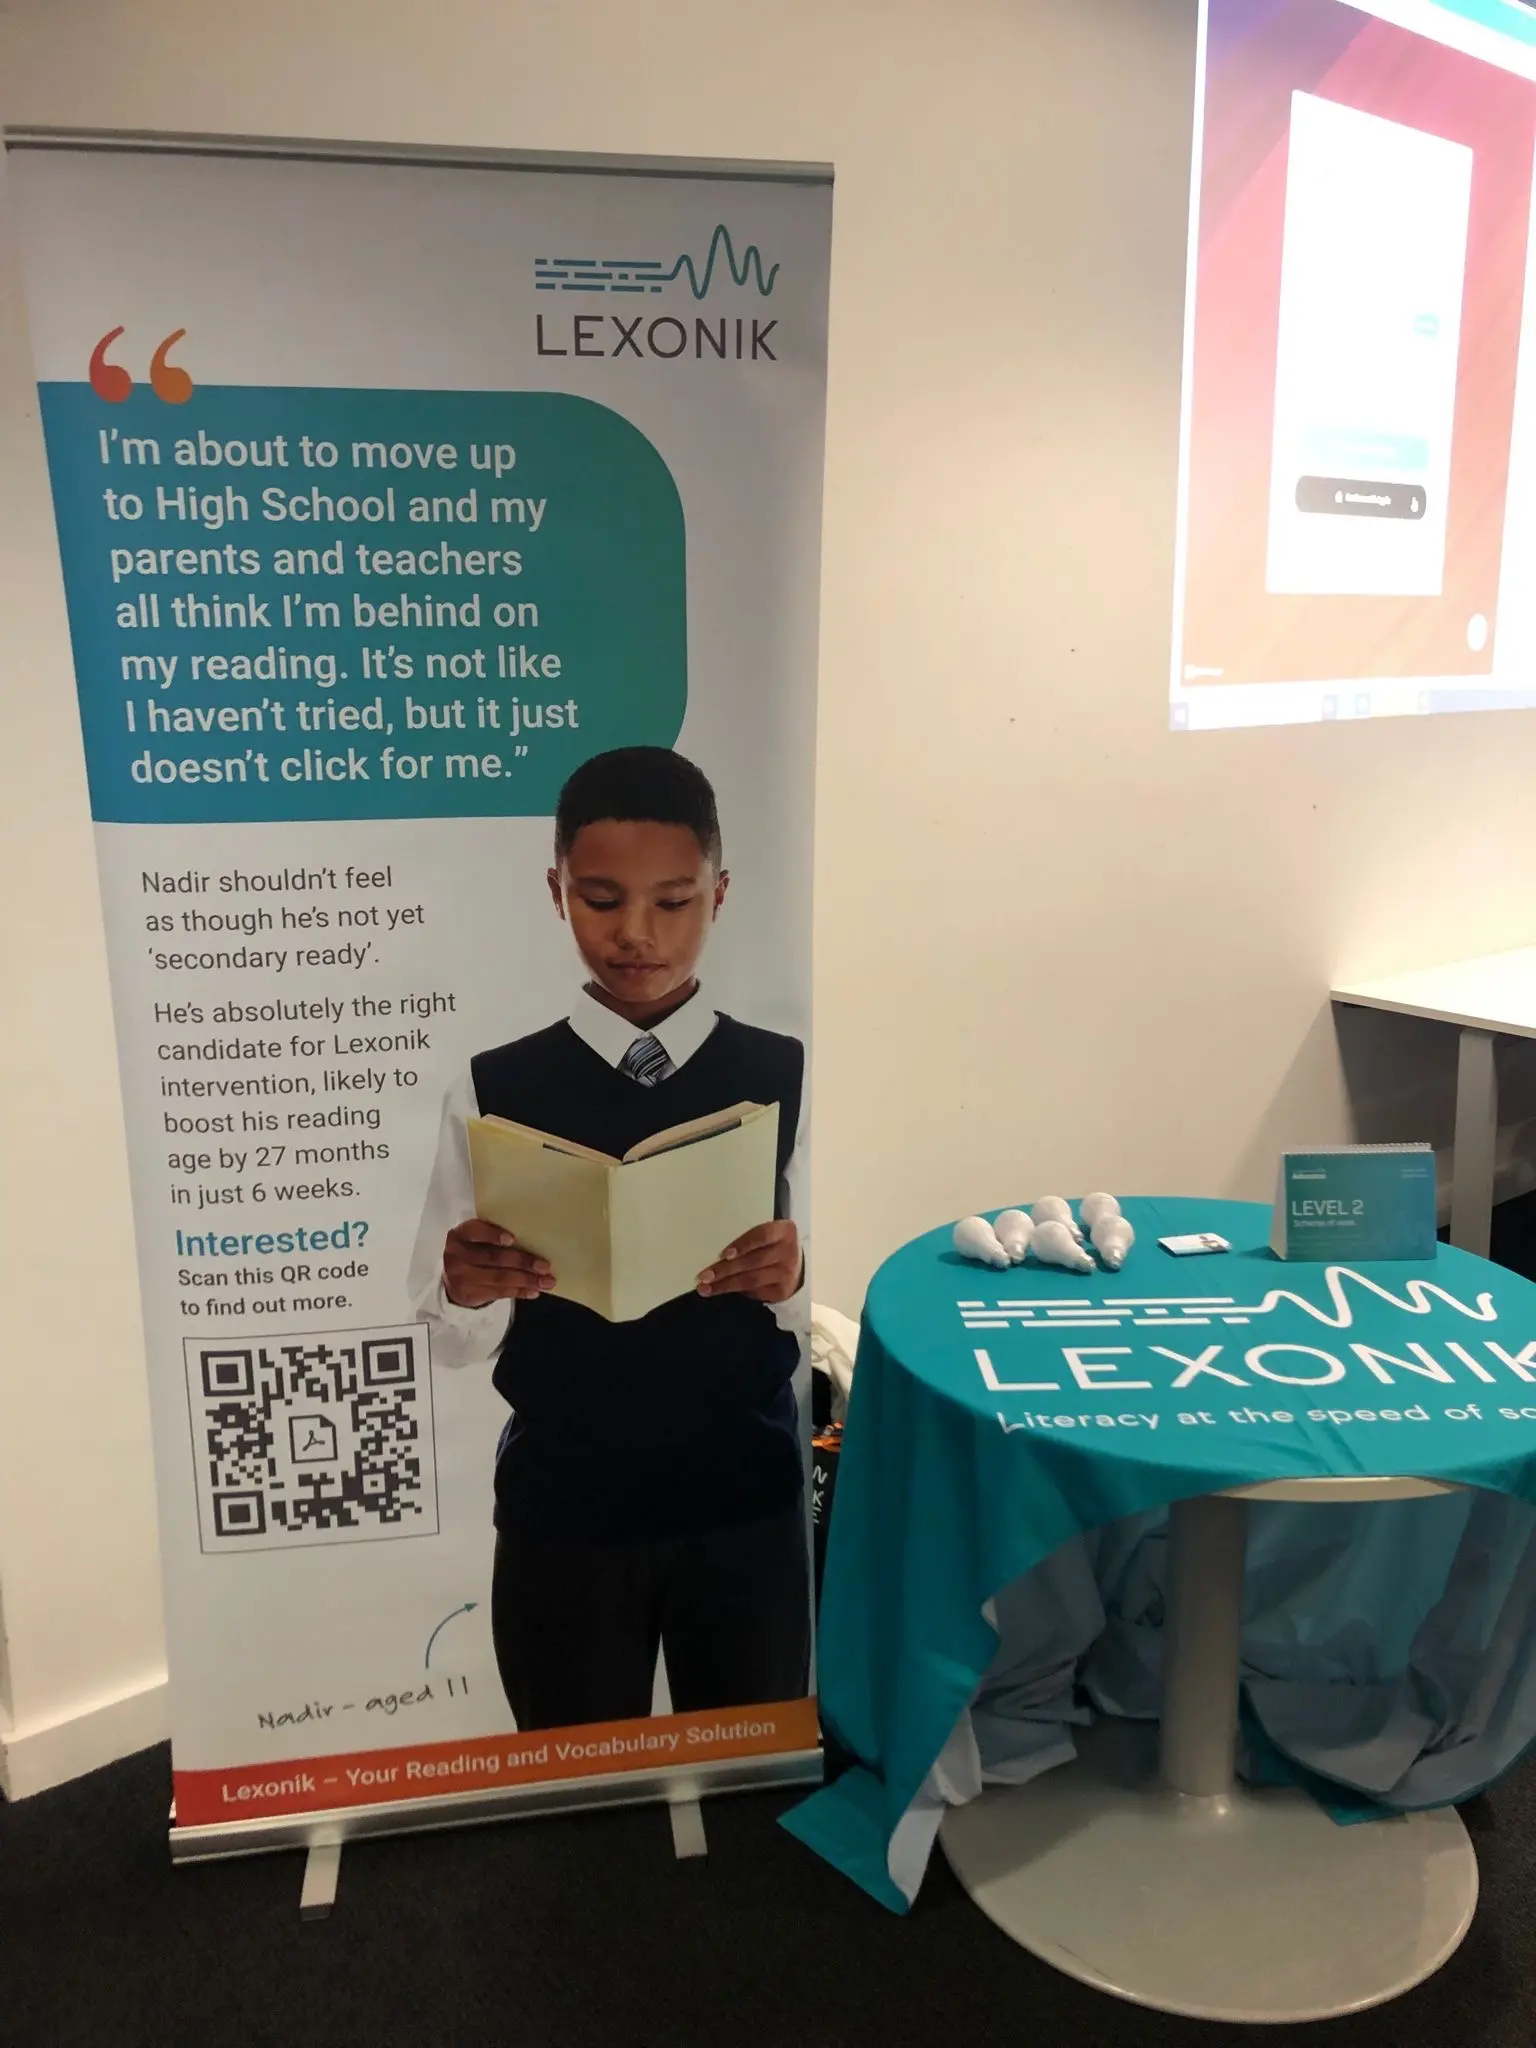 a lexonik banner display at the fed national education summit